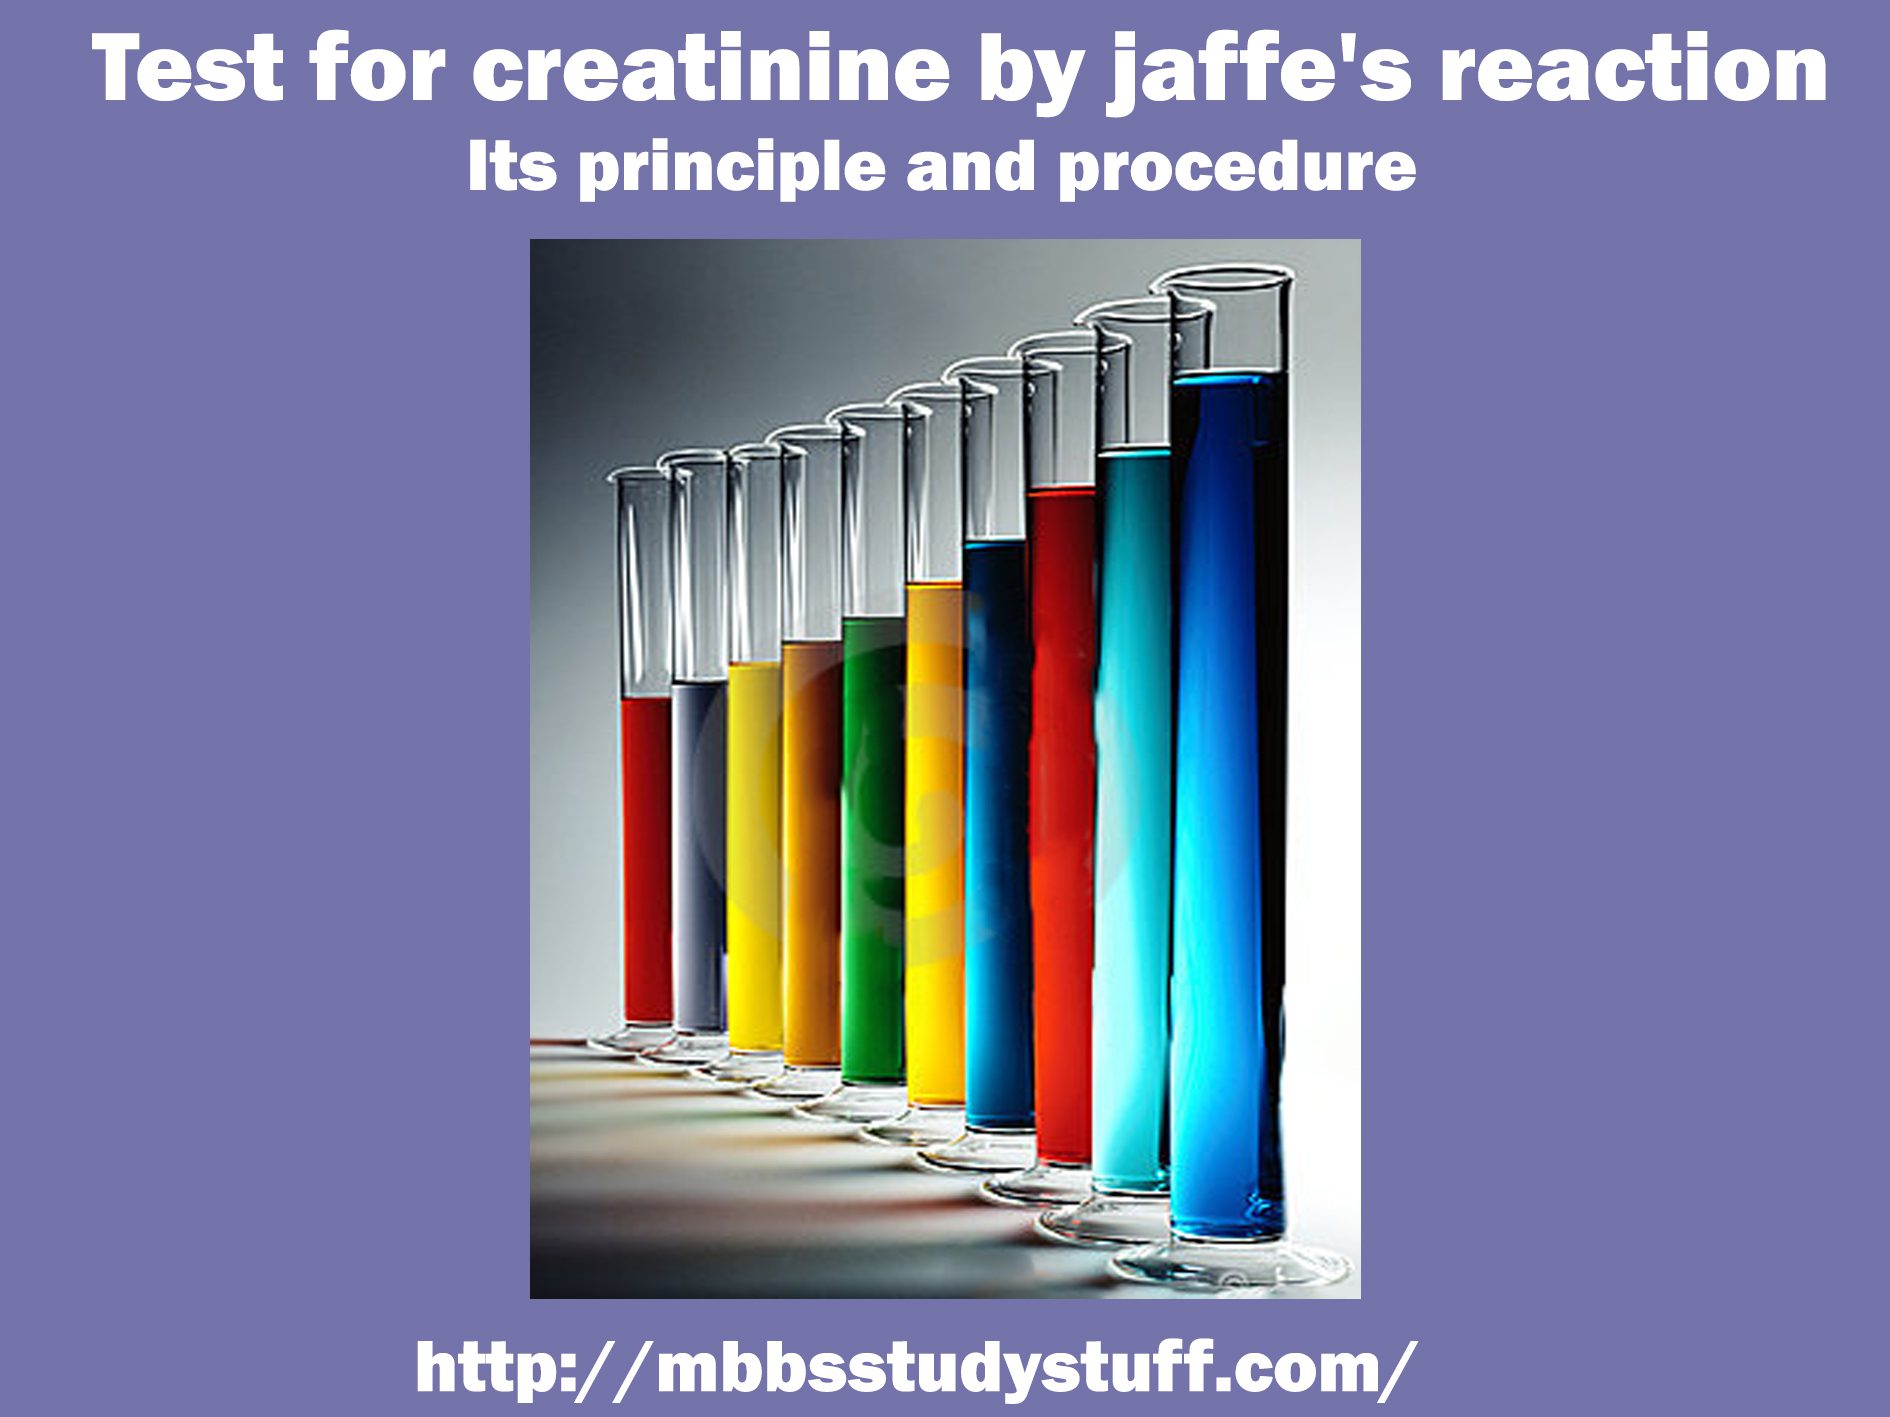 Test for creatinine by jaffe's reaction